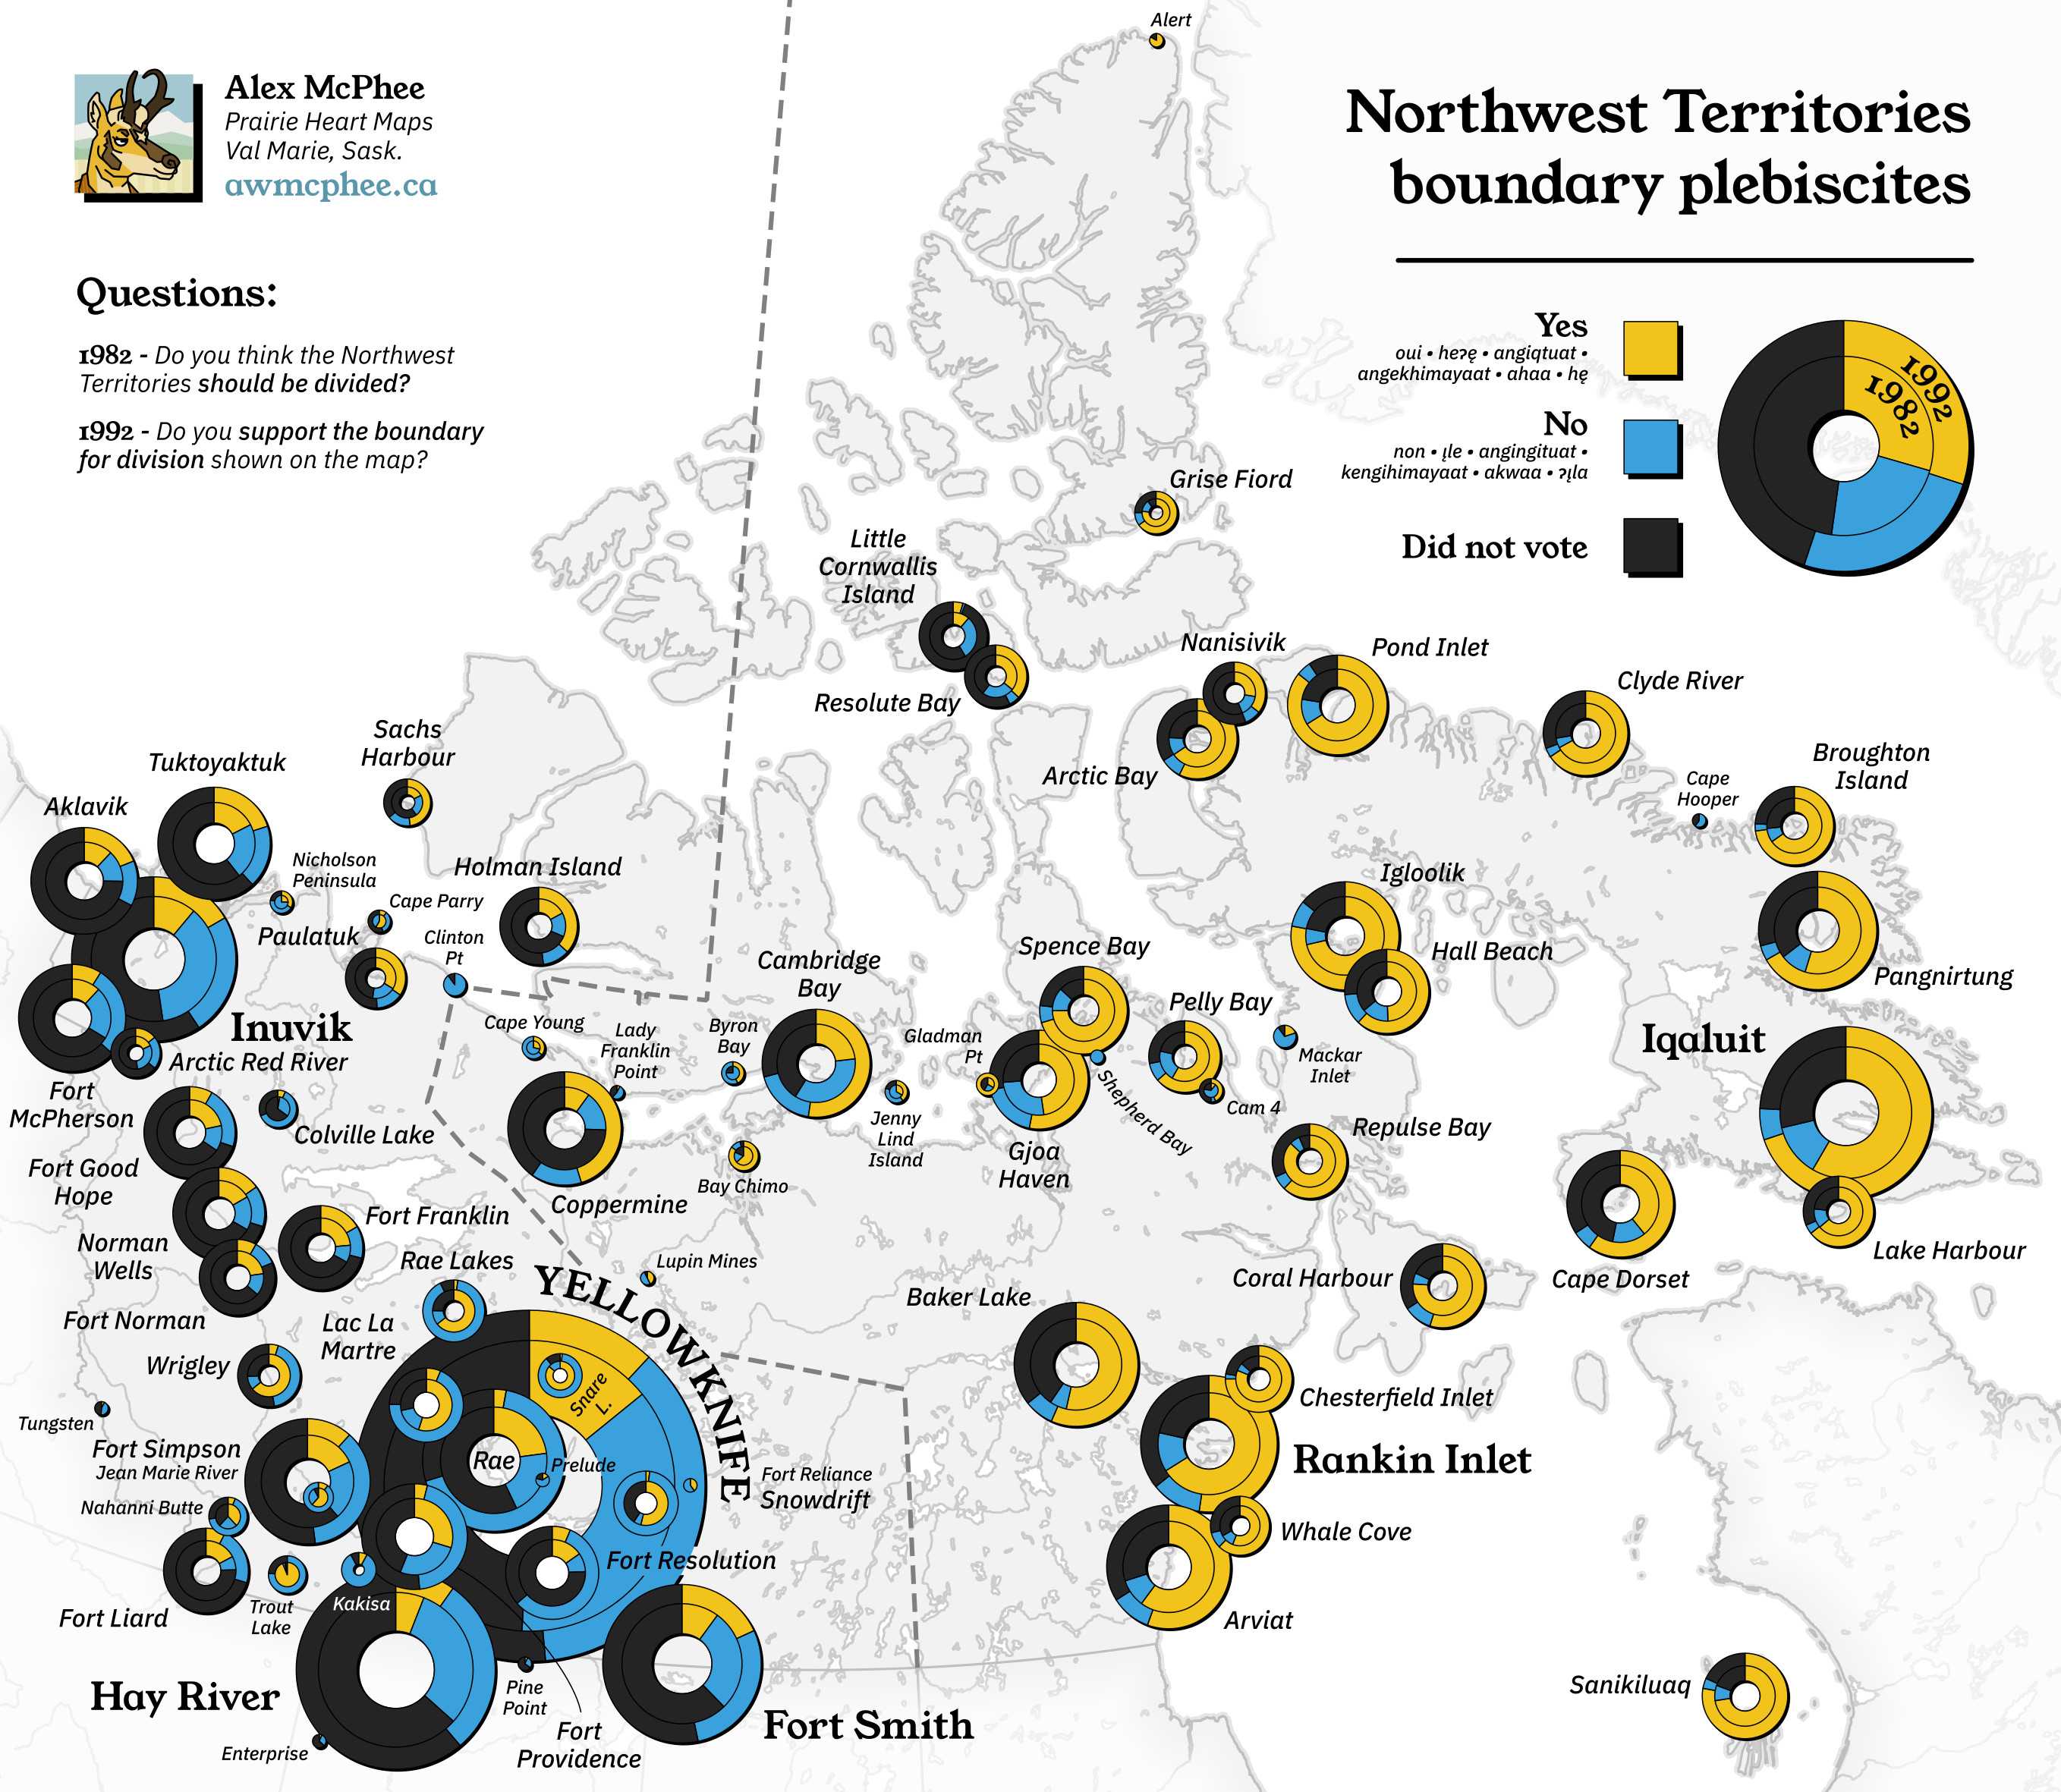 A map showing the results of the boundary plebiscites in the Northwest Territories.